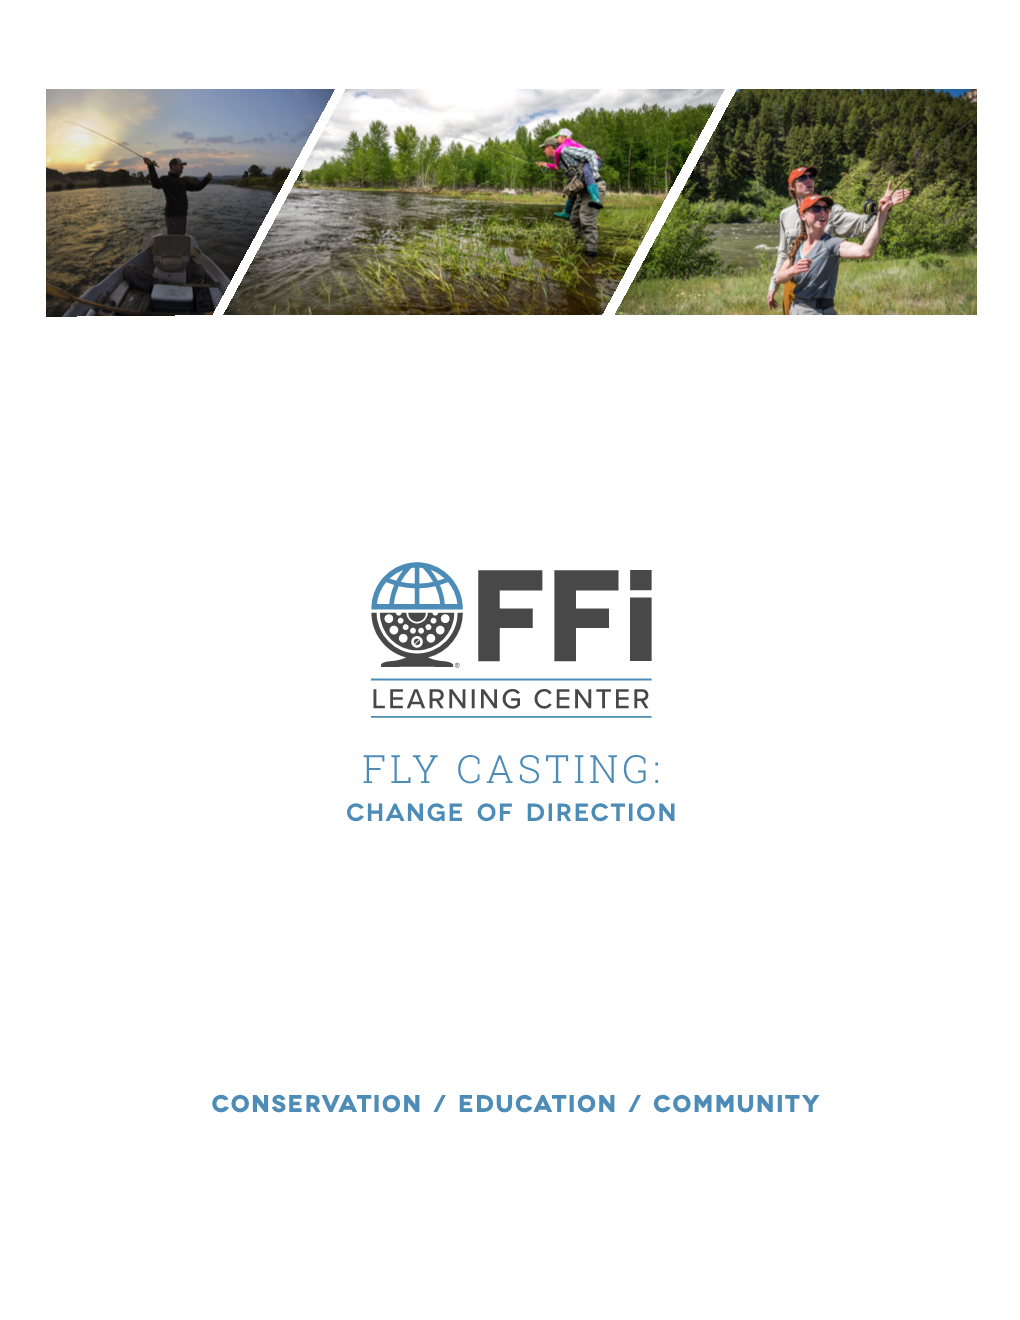 Fly Casting: Change of Direction